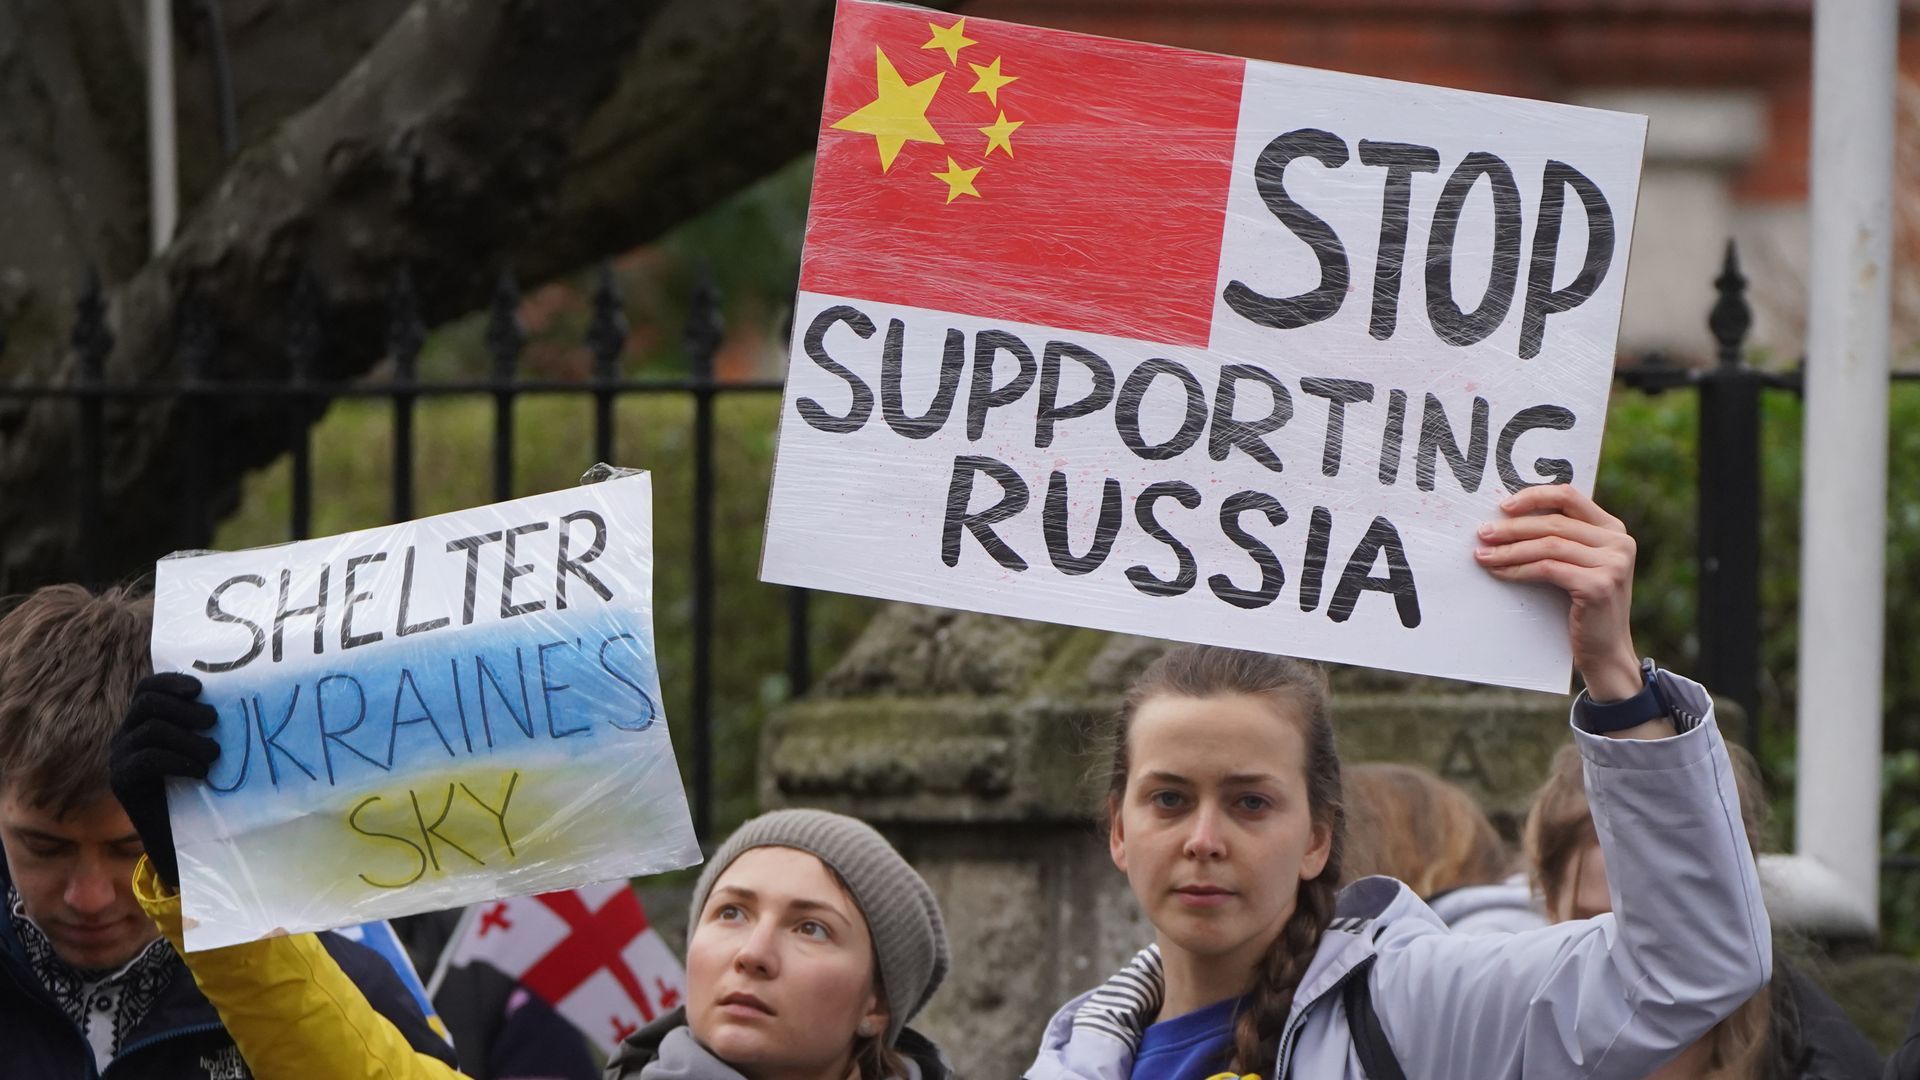 People protesting outside the Chinese Embassy in Dublin over the Russian invasion of Ukraine.